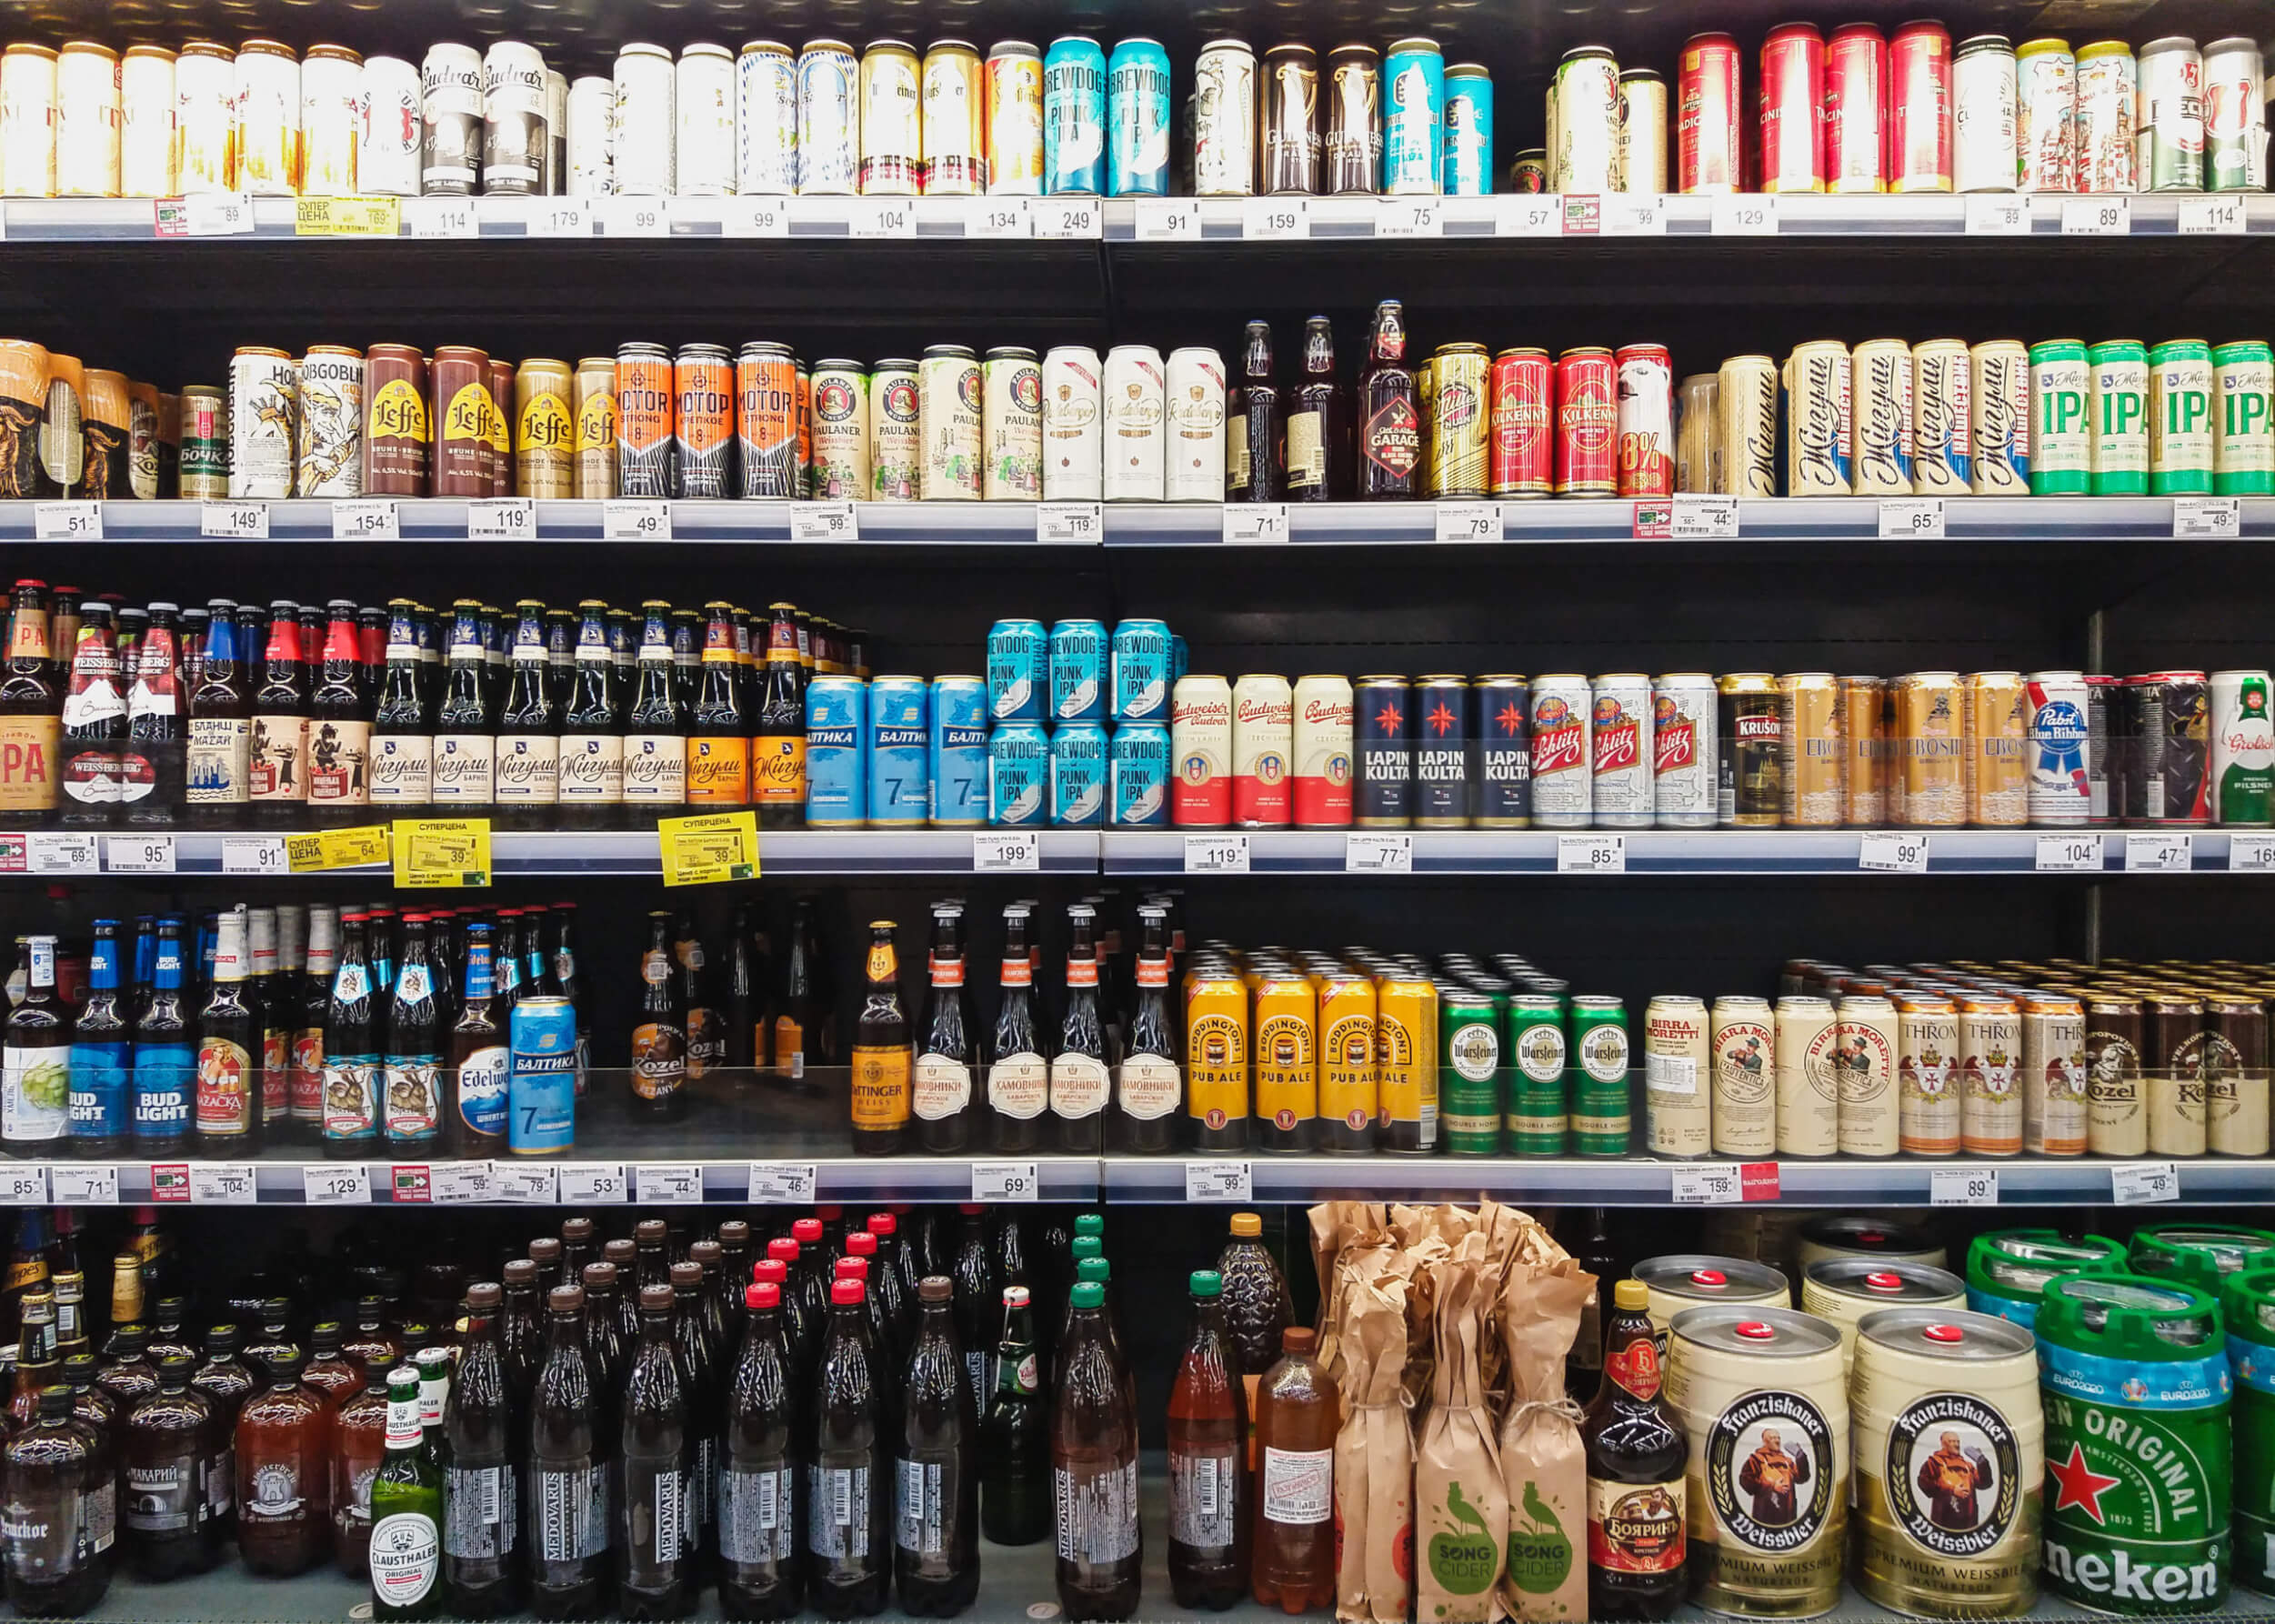 Beer in bottles and cans on grocery store shelves